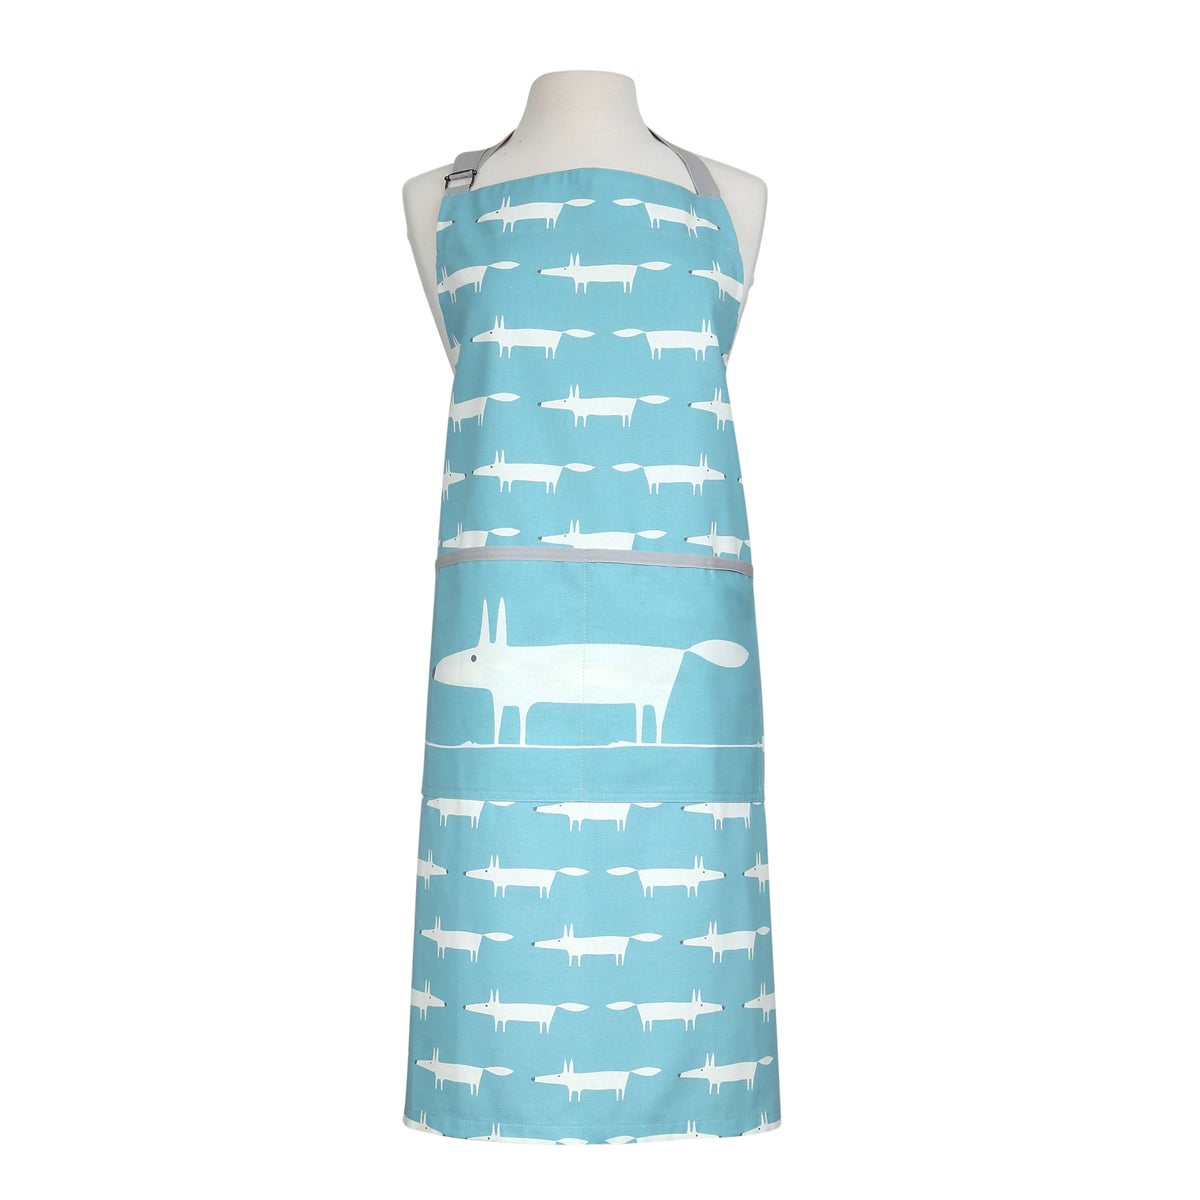 Scion Mr Fox Teal and White Adult Apron